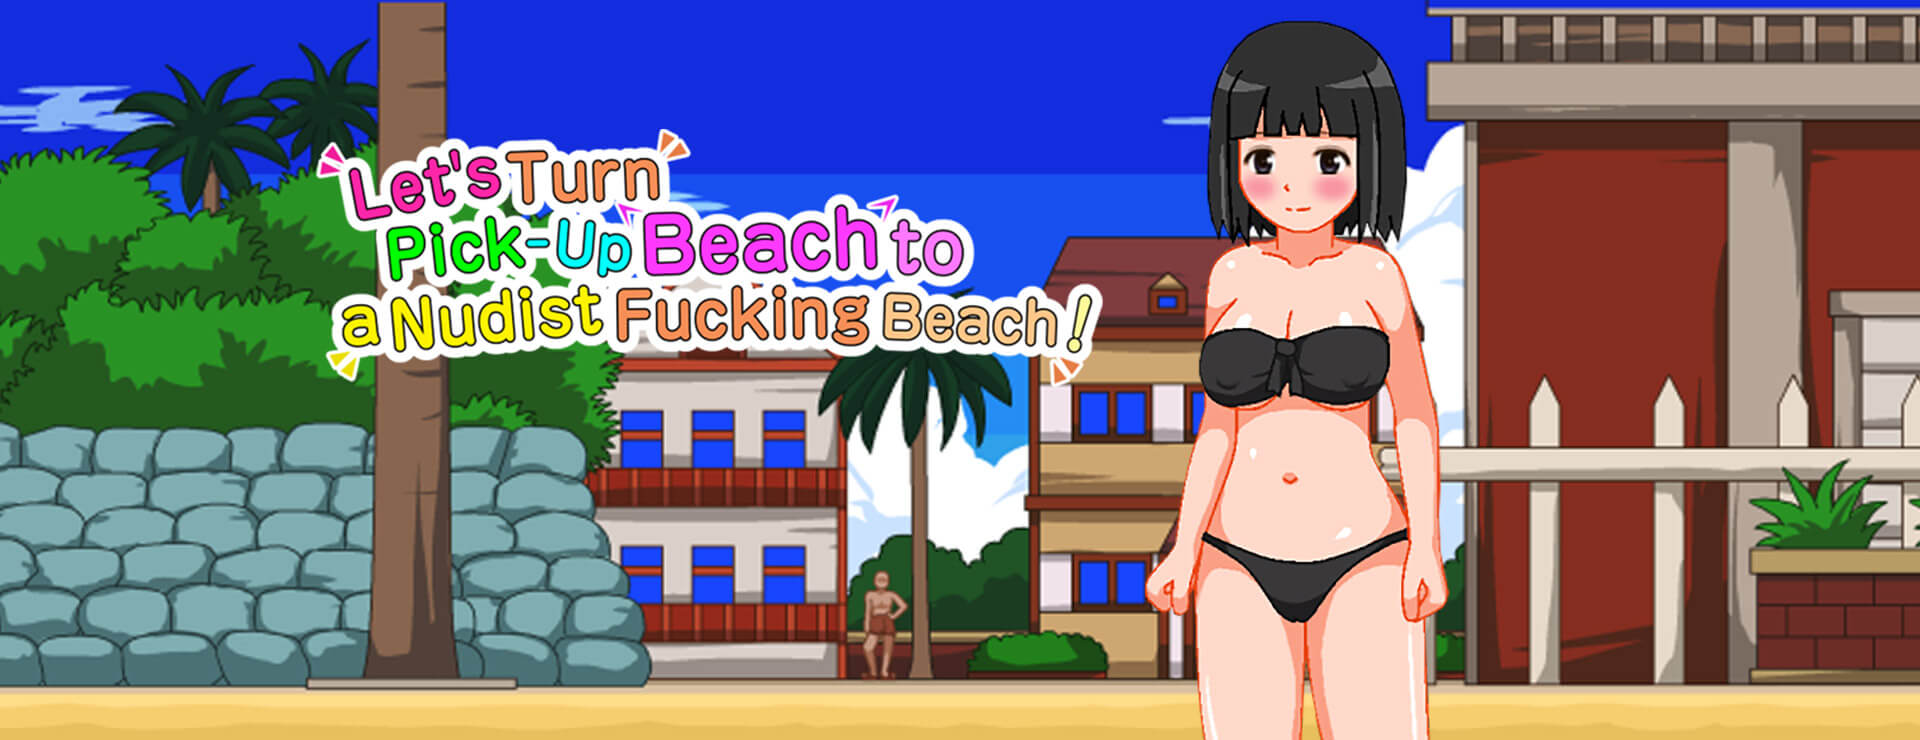 Let’s Turn Pick-Up Beach to a Nudist Fucking Beach!! - Simulation Jeu